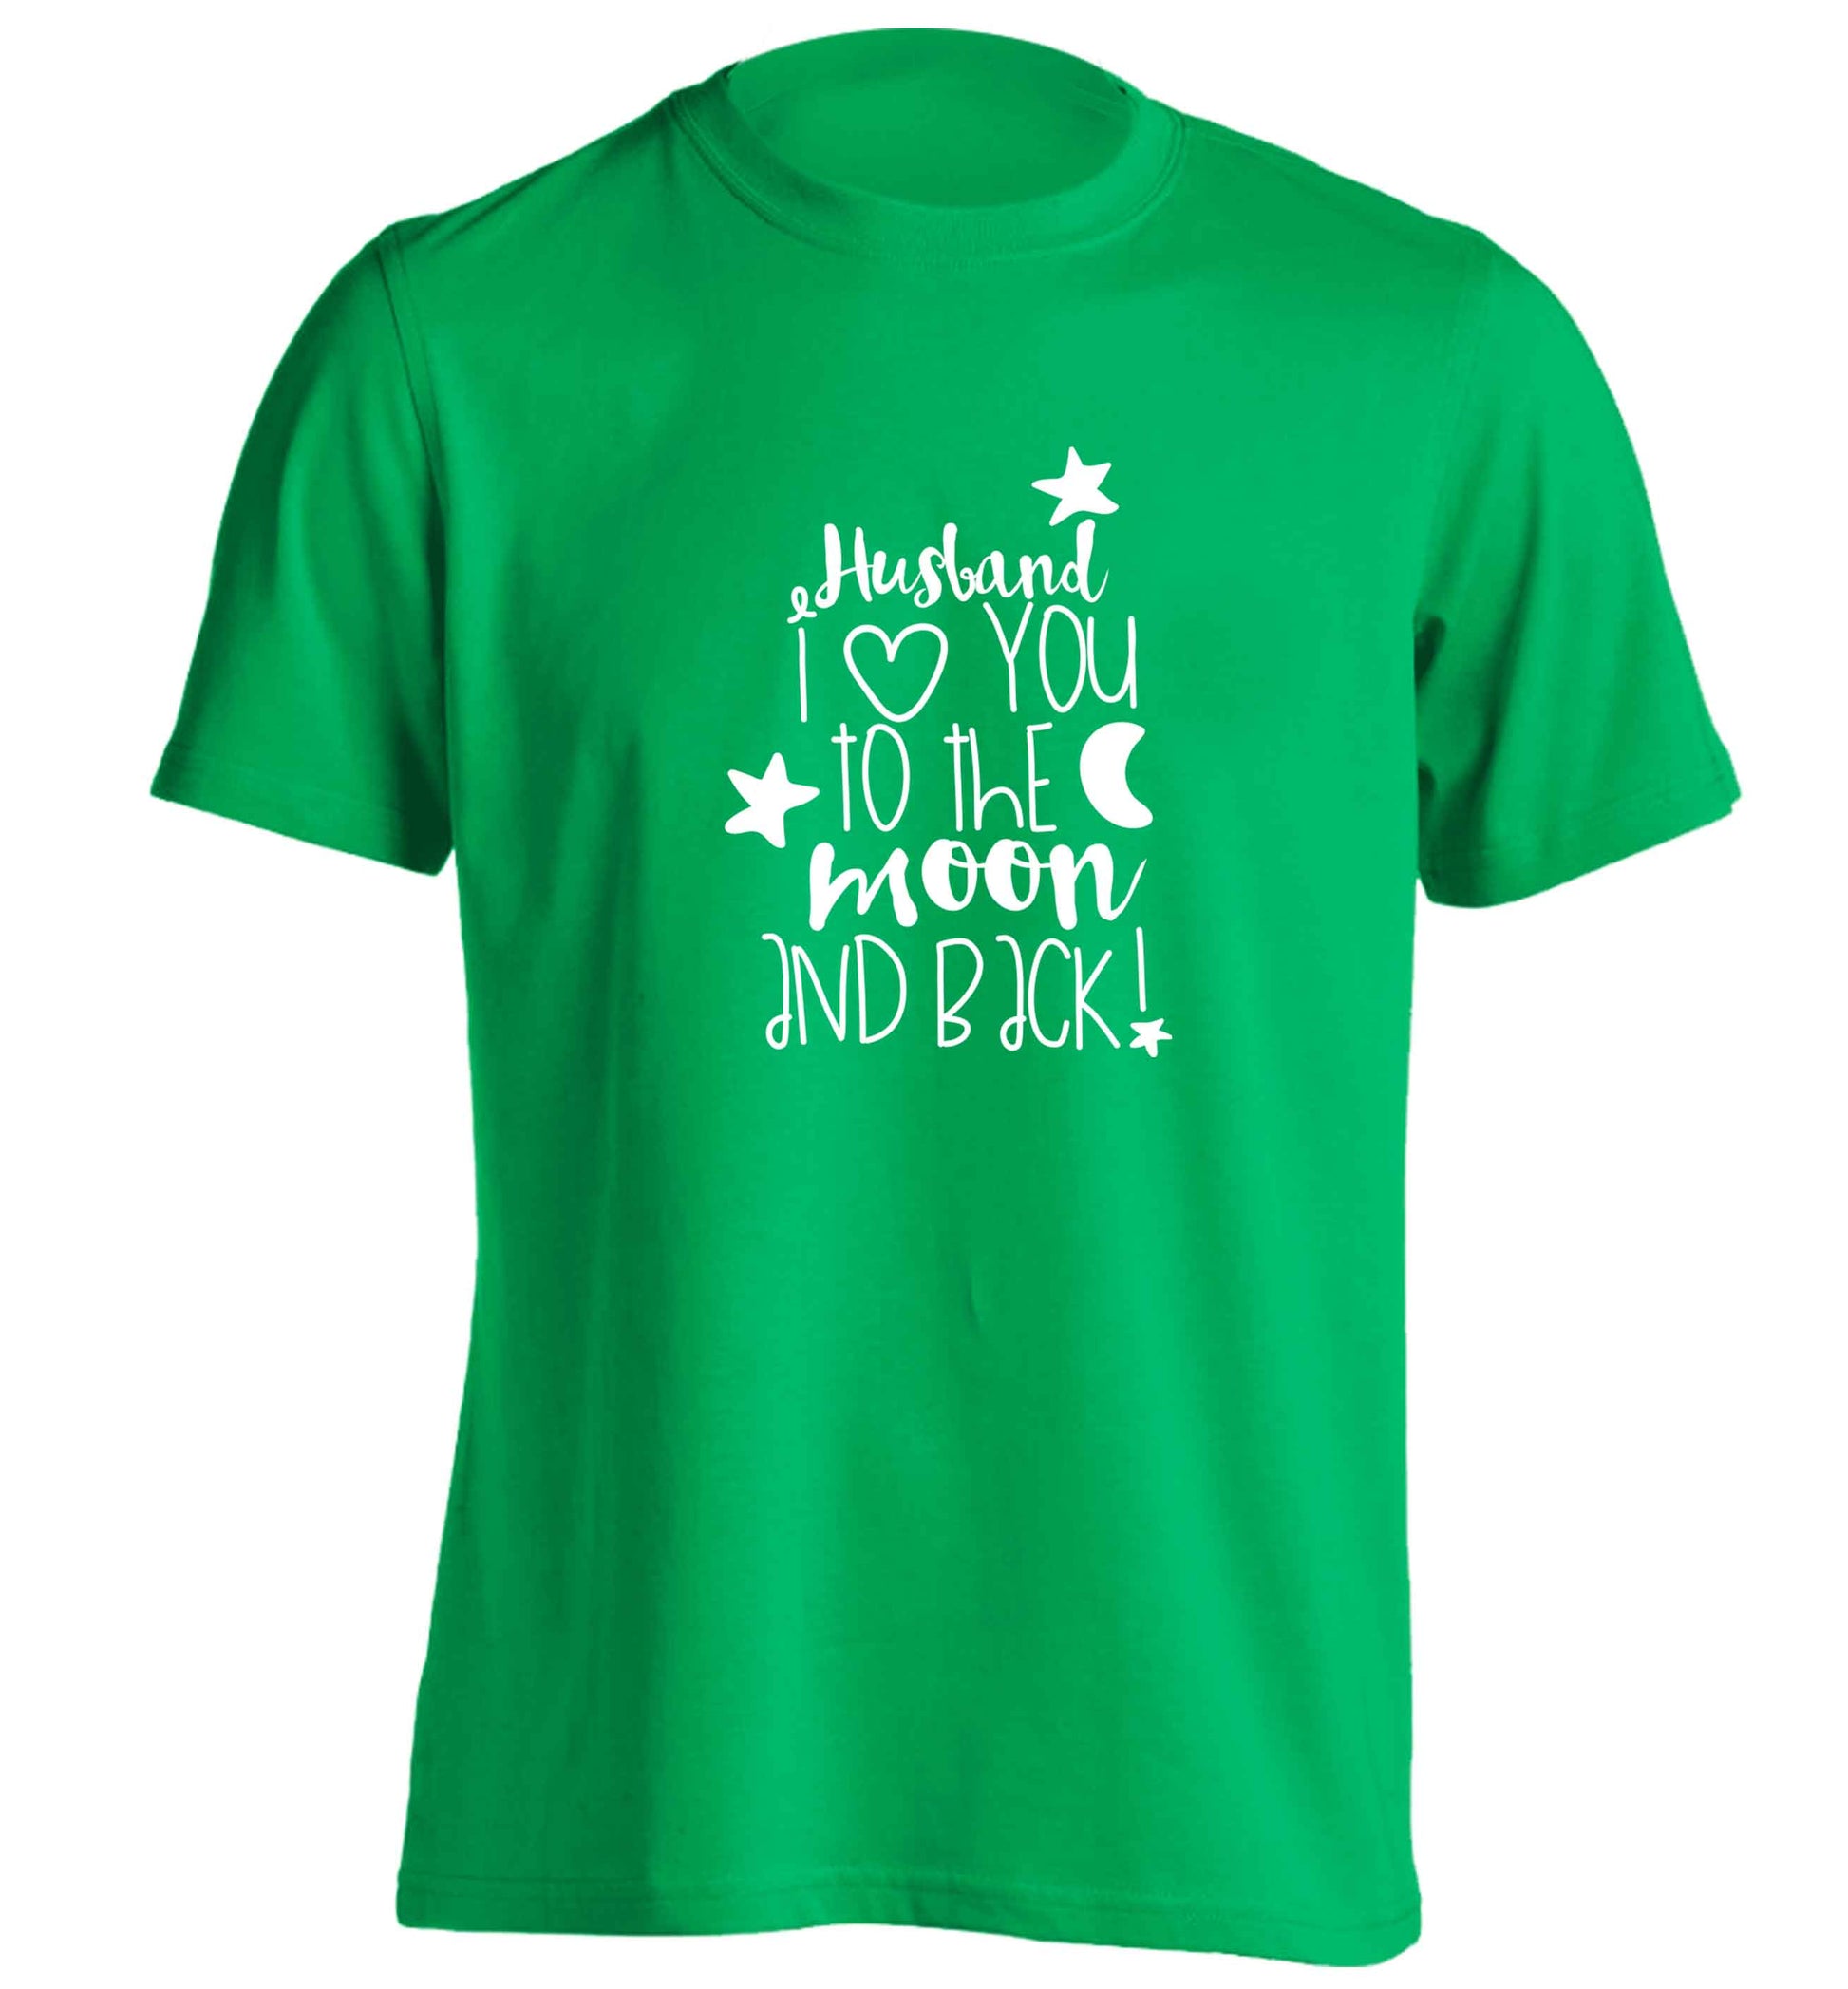 Husband I love you to the moon and back adults unisex green Tshirt 2XL